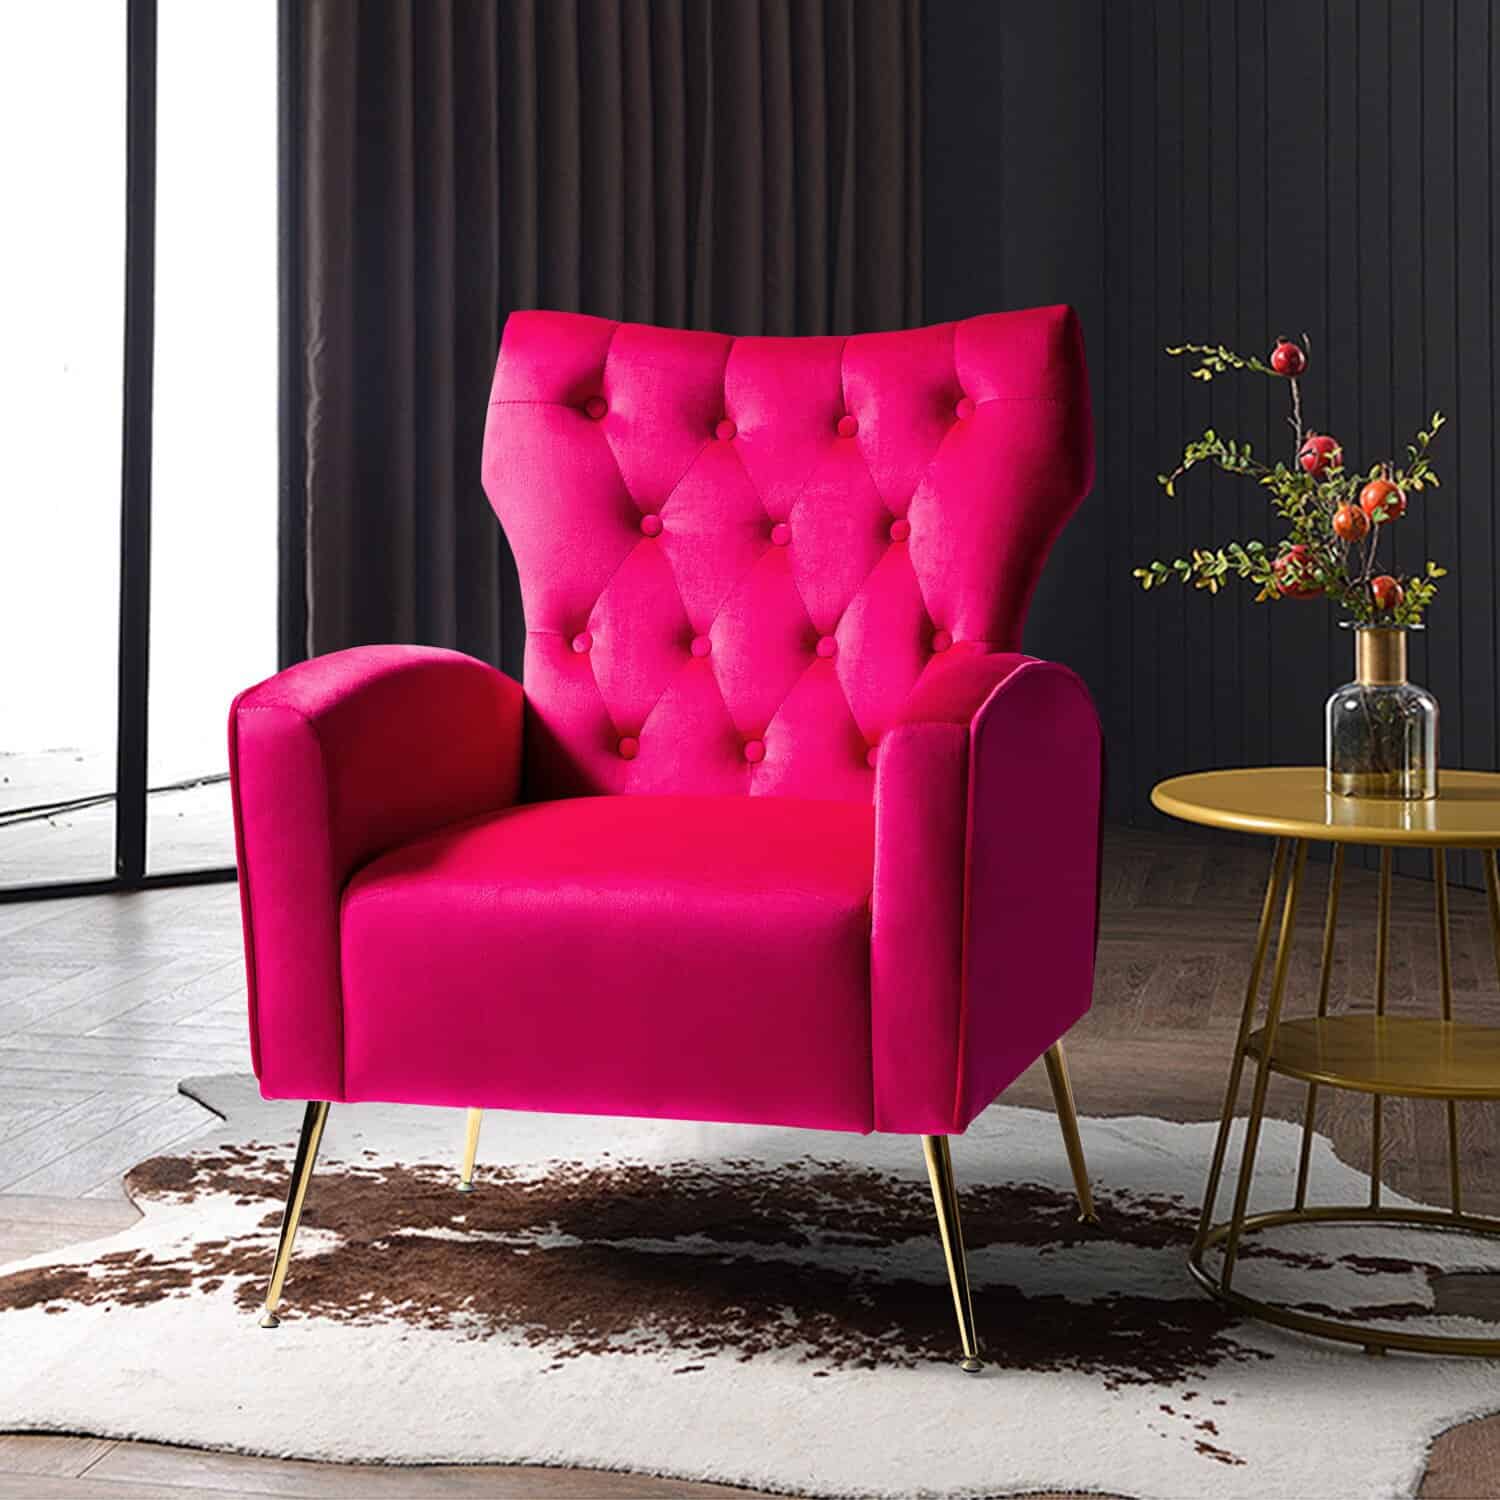 Fuchsia Is Great For A Bold Pop Of Color